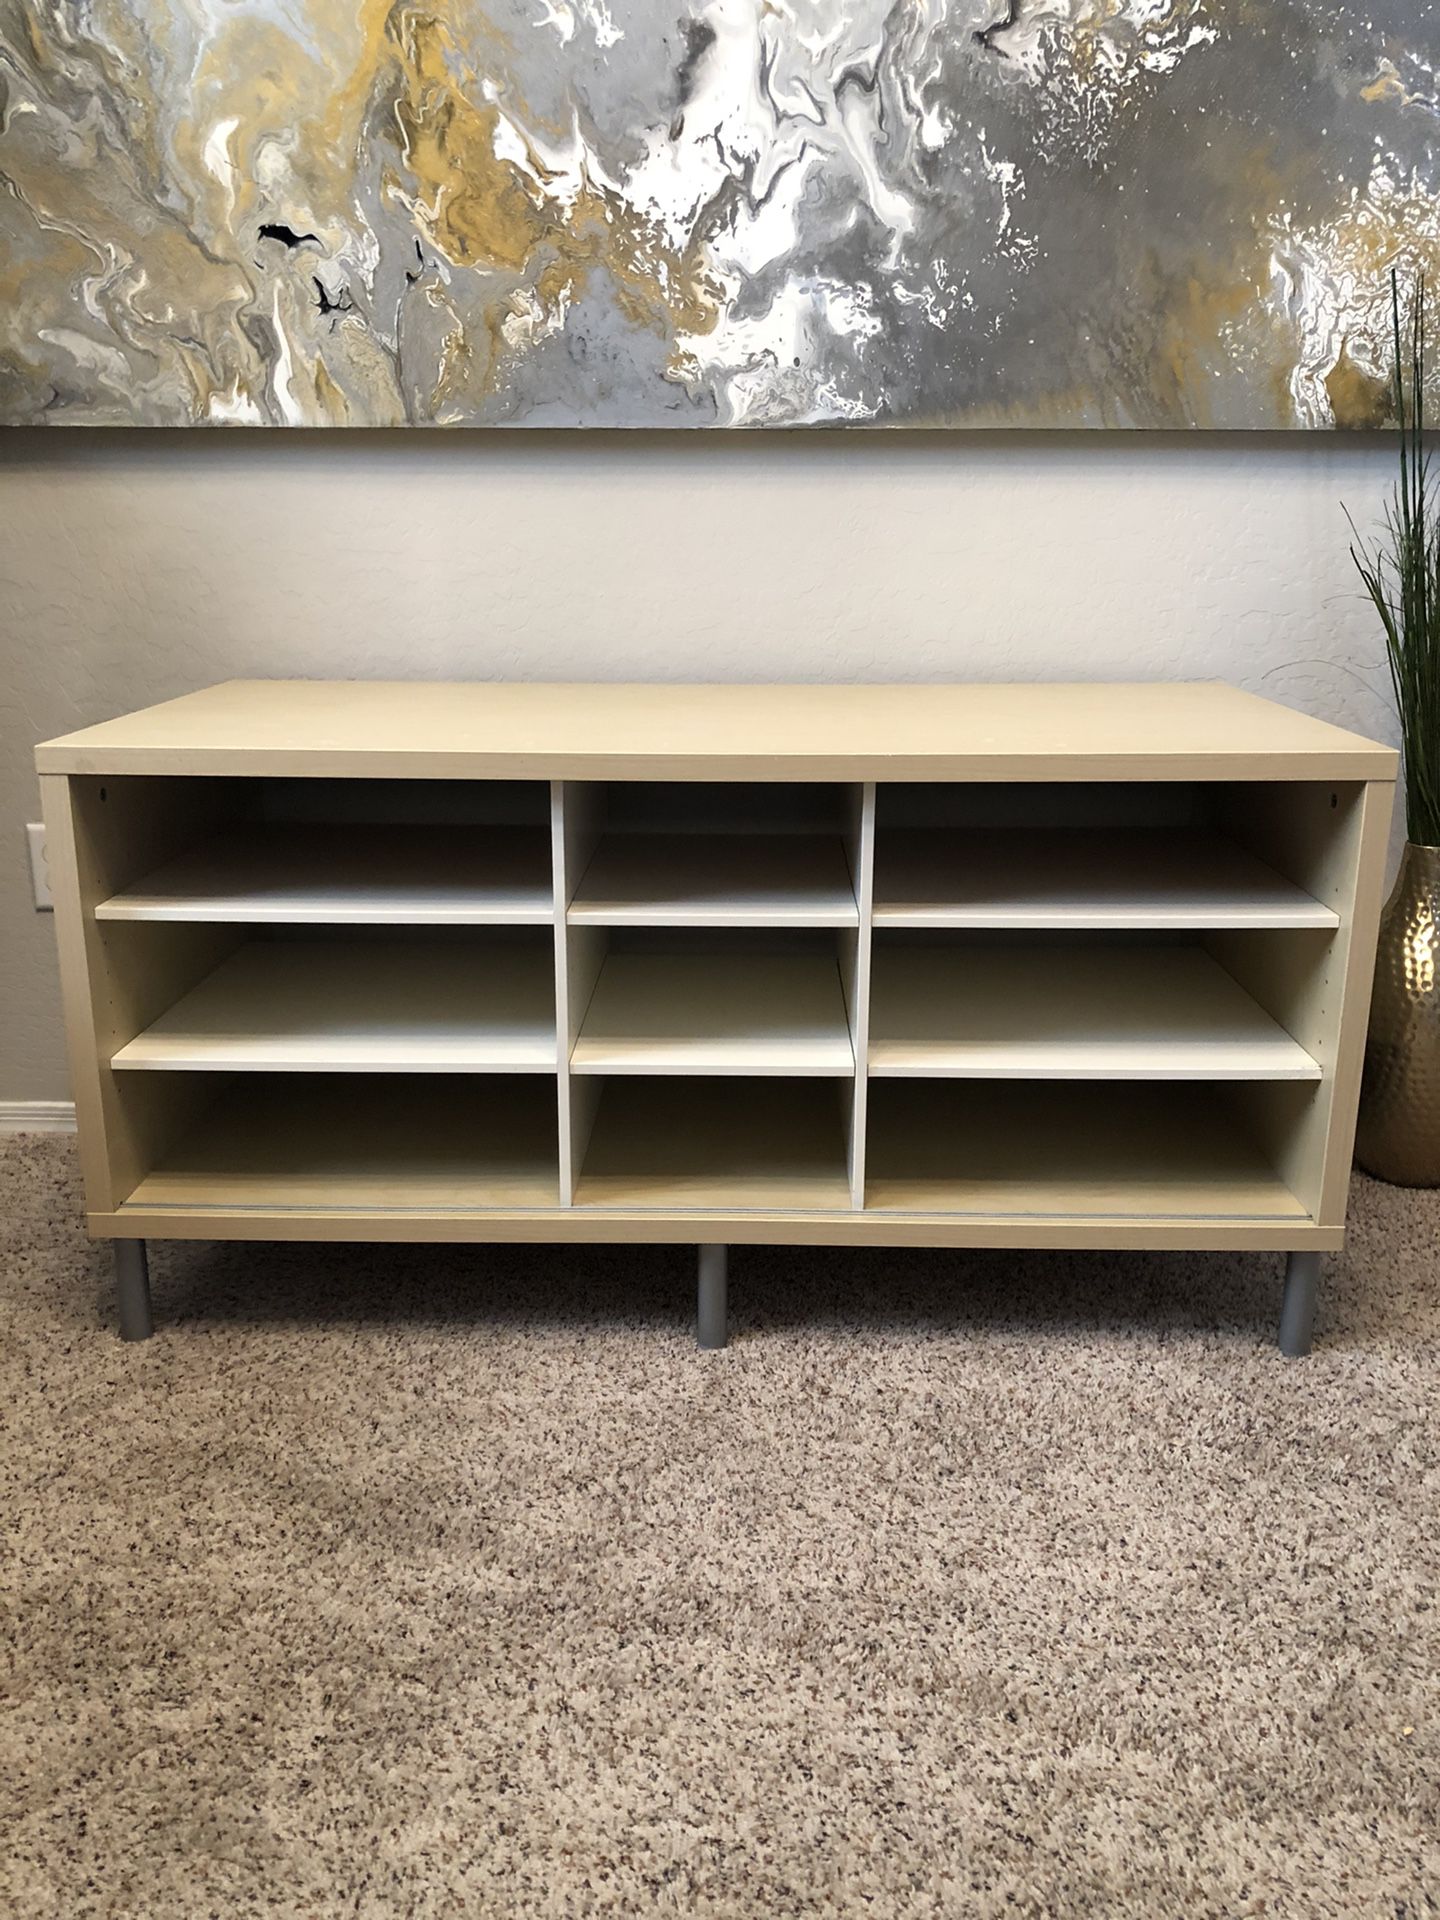 Cute Tv console Entry table with 9 adjustable shelves